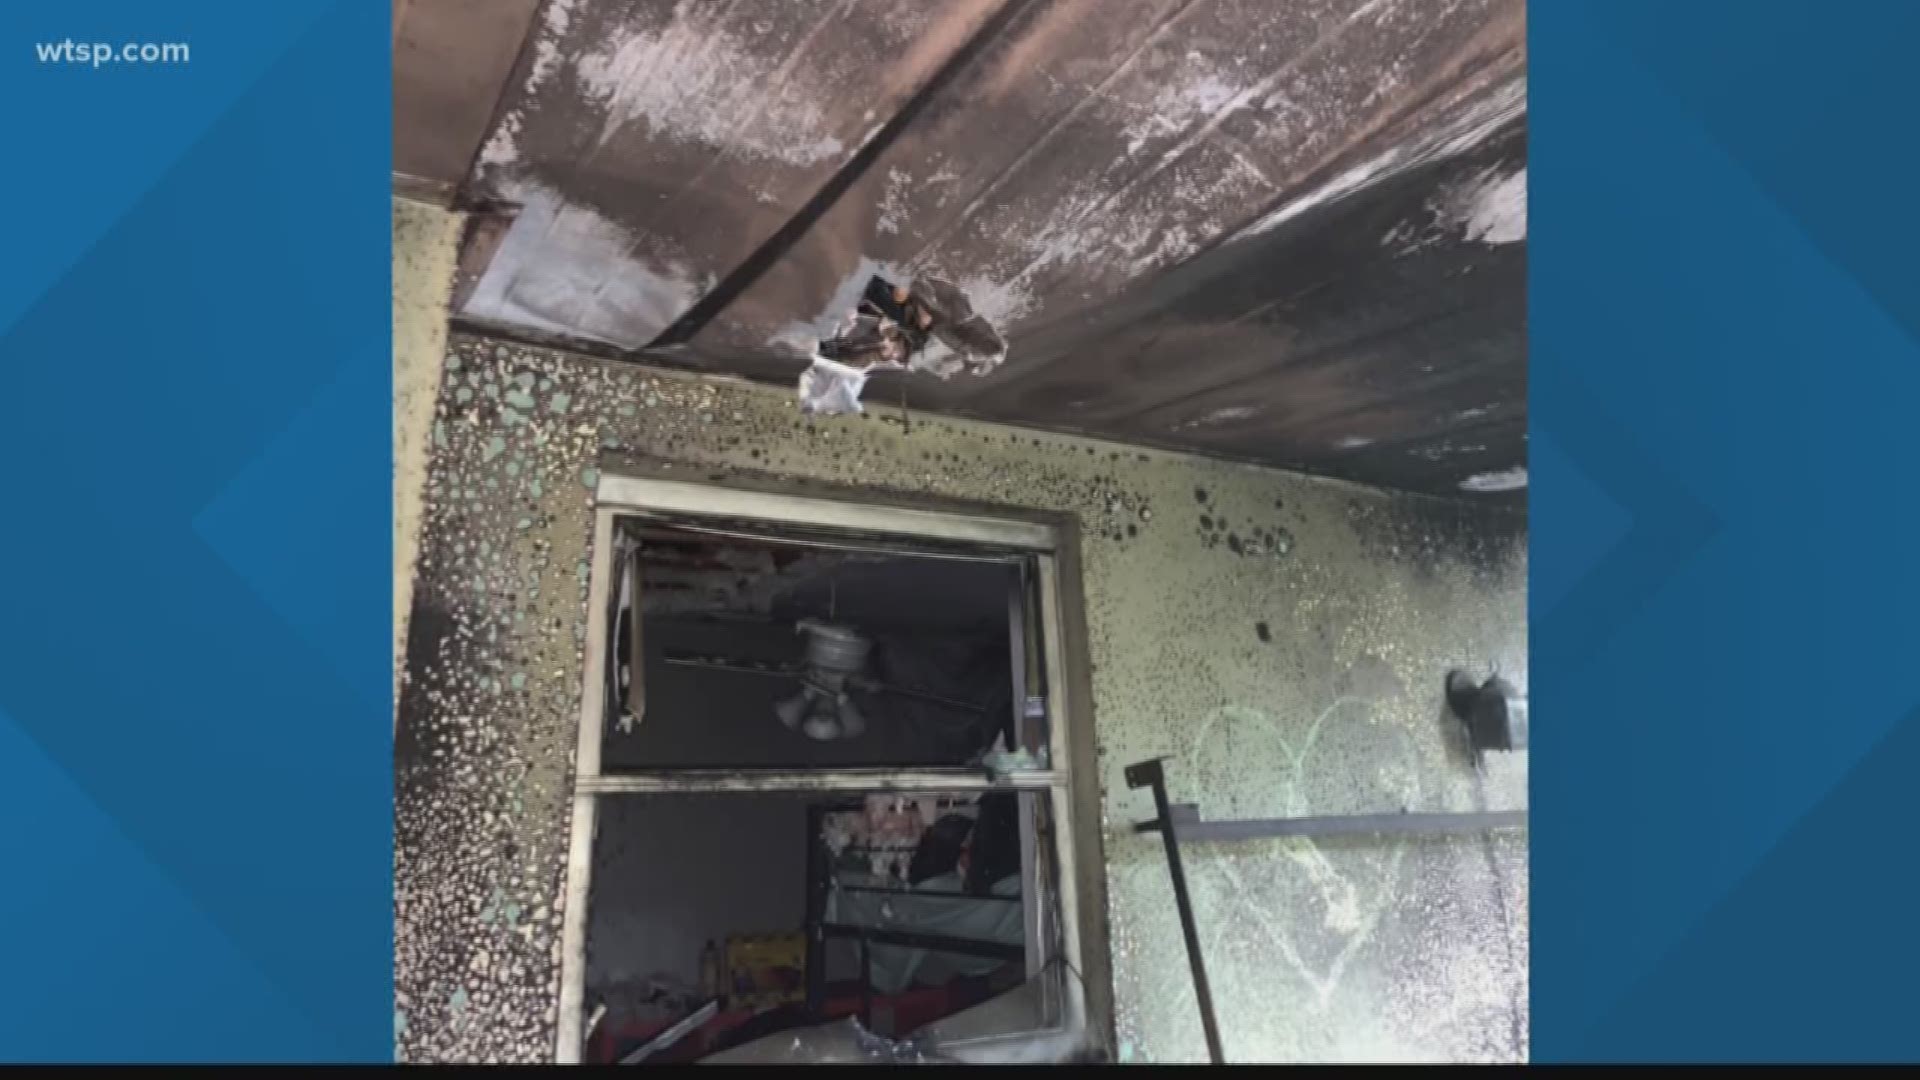 Days before Christmas, one family’s life went up in flames: Kelli Johnston and her girls barely escaped an electrical fire that destroyed her home.